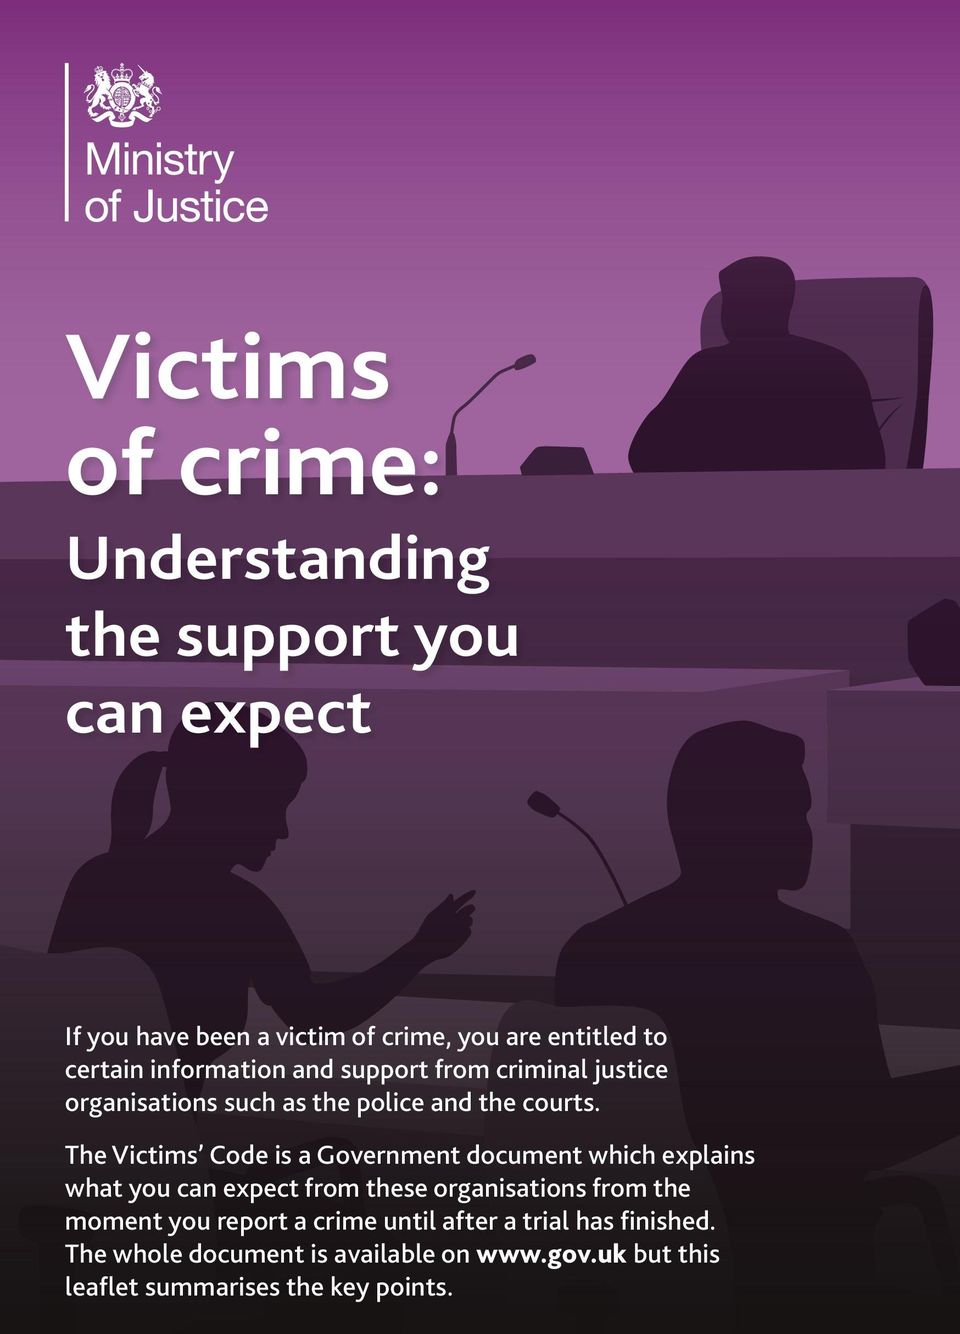 The Victims Code is a Government document which explains what you can expect from these organisations from the moment